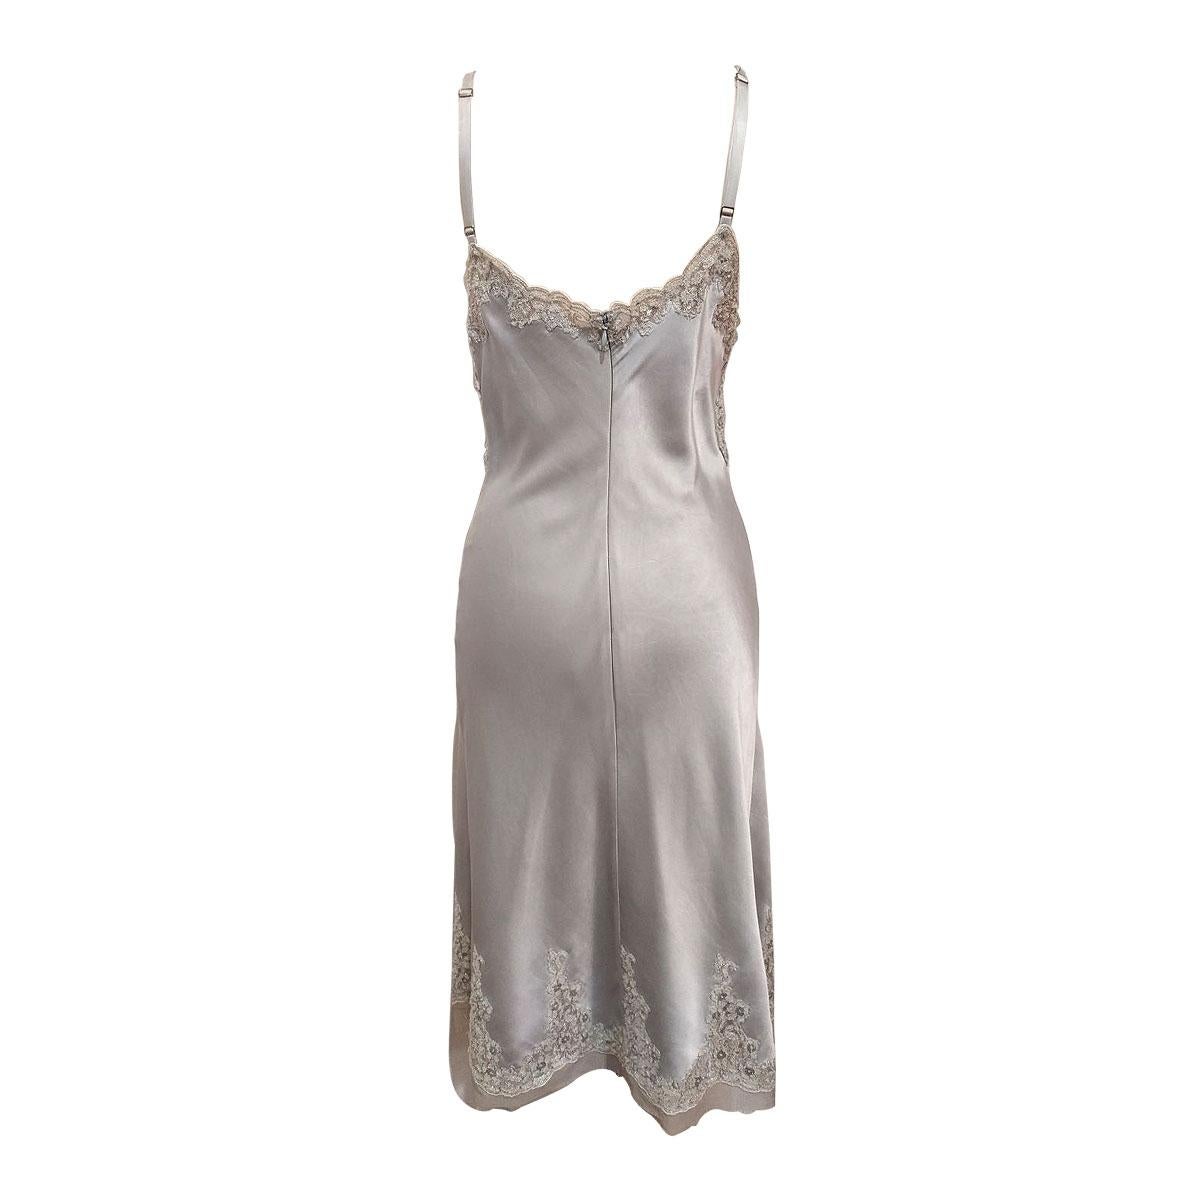 Beautiful Scervino dress
Silk (93%) Lycra (7%)
Light grey color
Lace details on bottom and chest with little transparency effect
Adjustable epalouettes
Inside presence of incorporated bra with underwired and preformed cup
Total length cm 90 (35,43